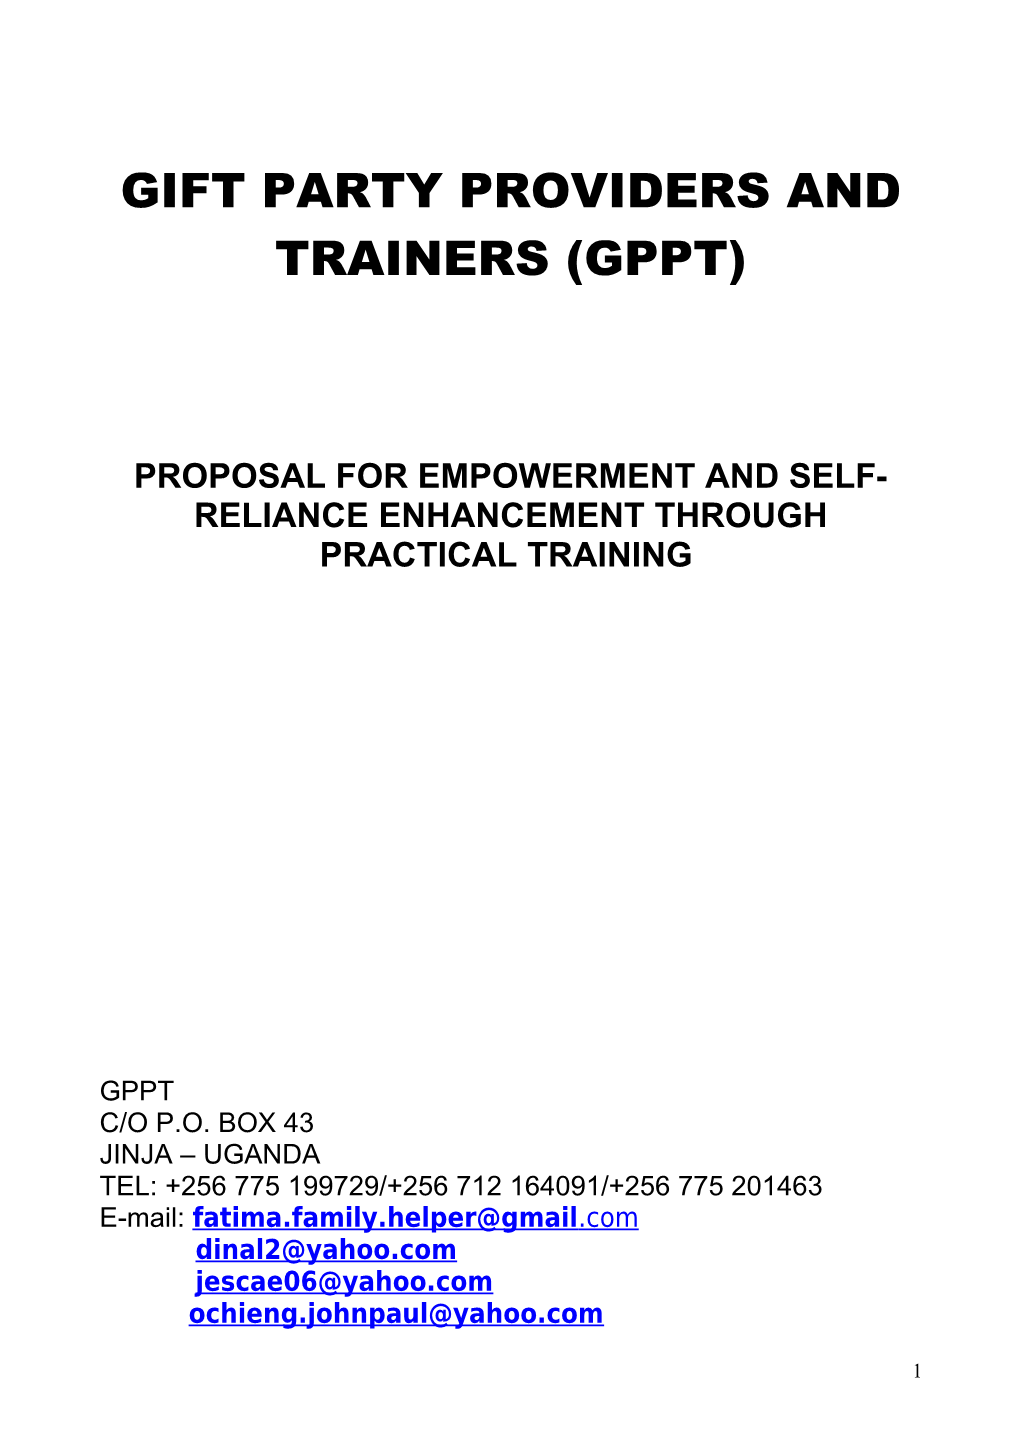 Gift Party Providers and Trainers (Gppt)